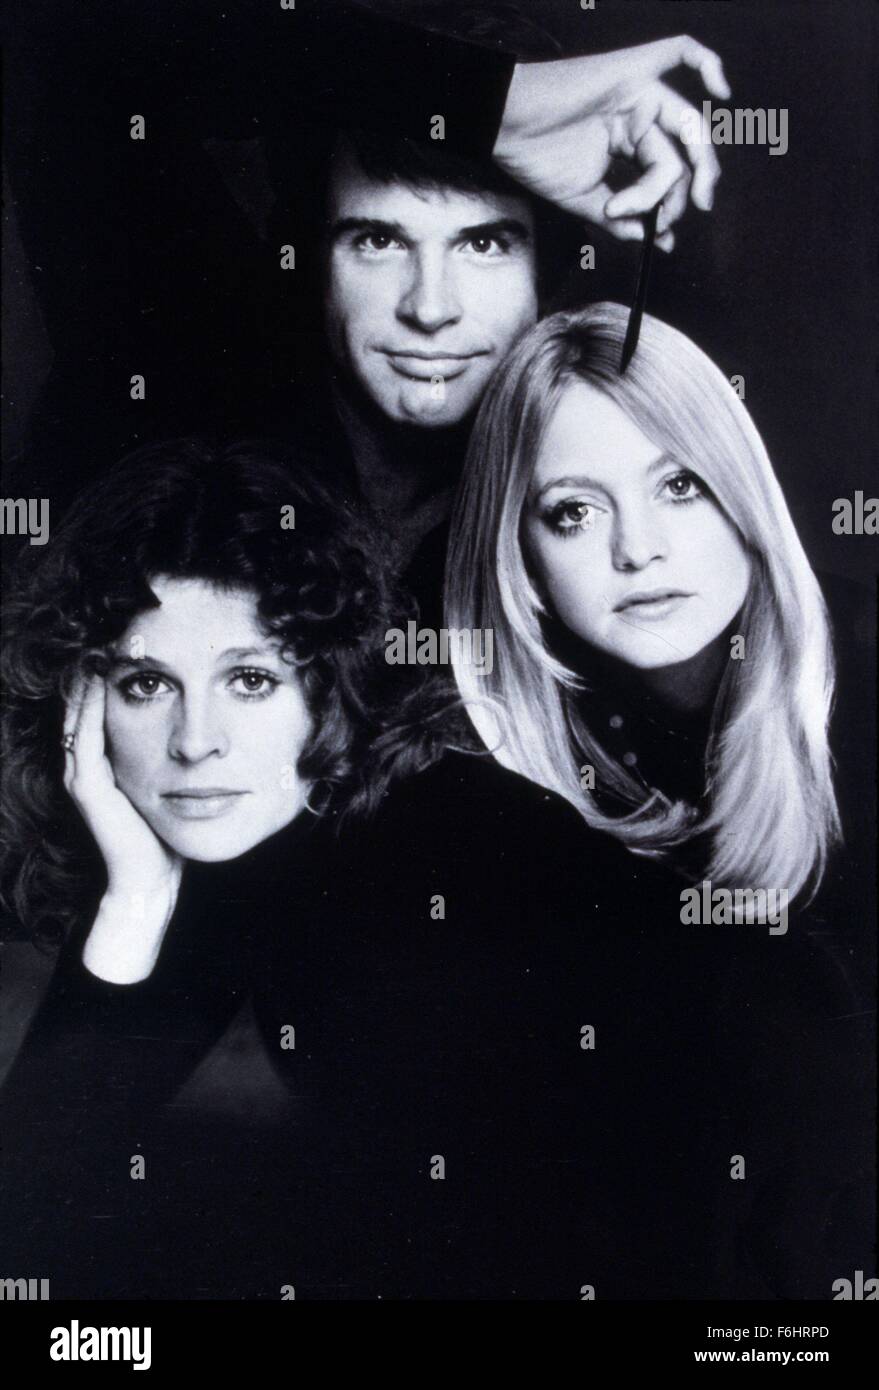 1975, Film Title: SHAMPOO, Director: HAL ASHBY, Studio: COLUMBIA, Pictured: HAL ASHBY, WARREN BEATTY, JULIE CHRISTIE, GOLDIE HAWN, PORTRAIT, STUDIO, RETRO, CLOWNING. (Credit Image: SNAP) Stock Photo